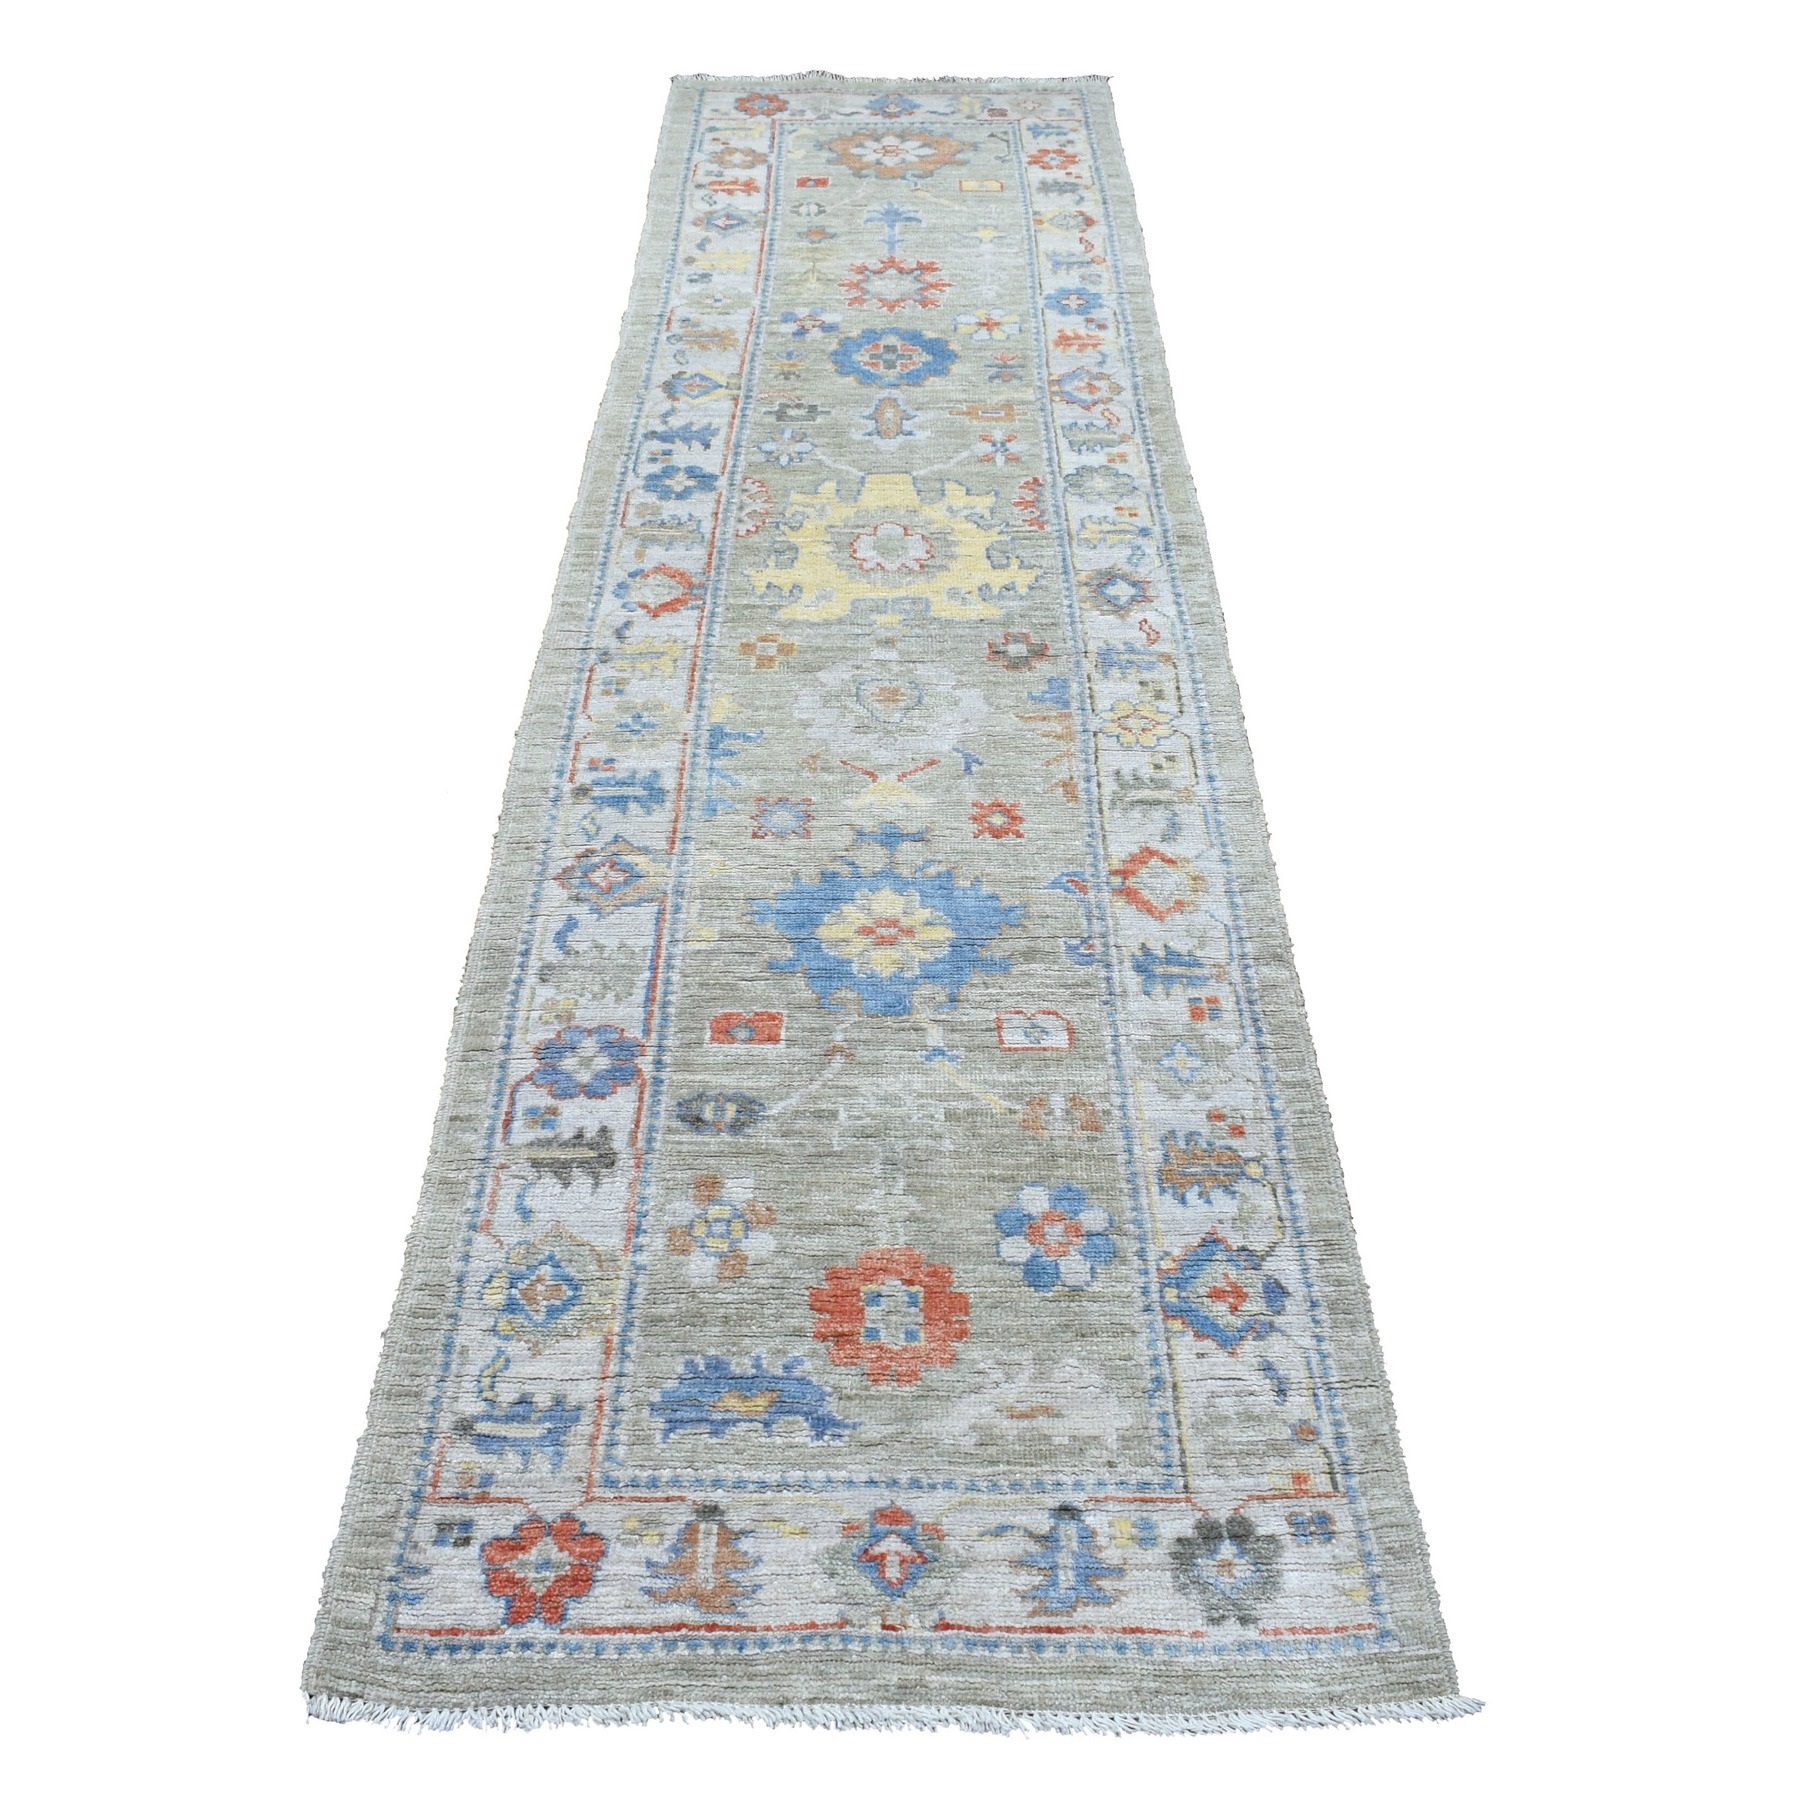 2'7"x9'7" Gray Angora Oushak in a Colorful Palette Hand Woven Natural Wool Oriental Runner Rug 